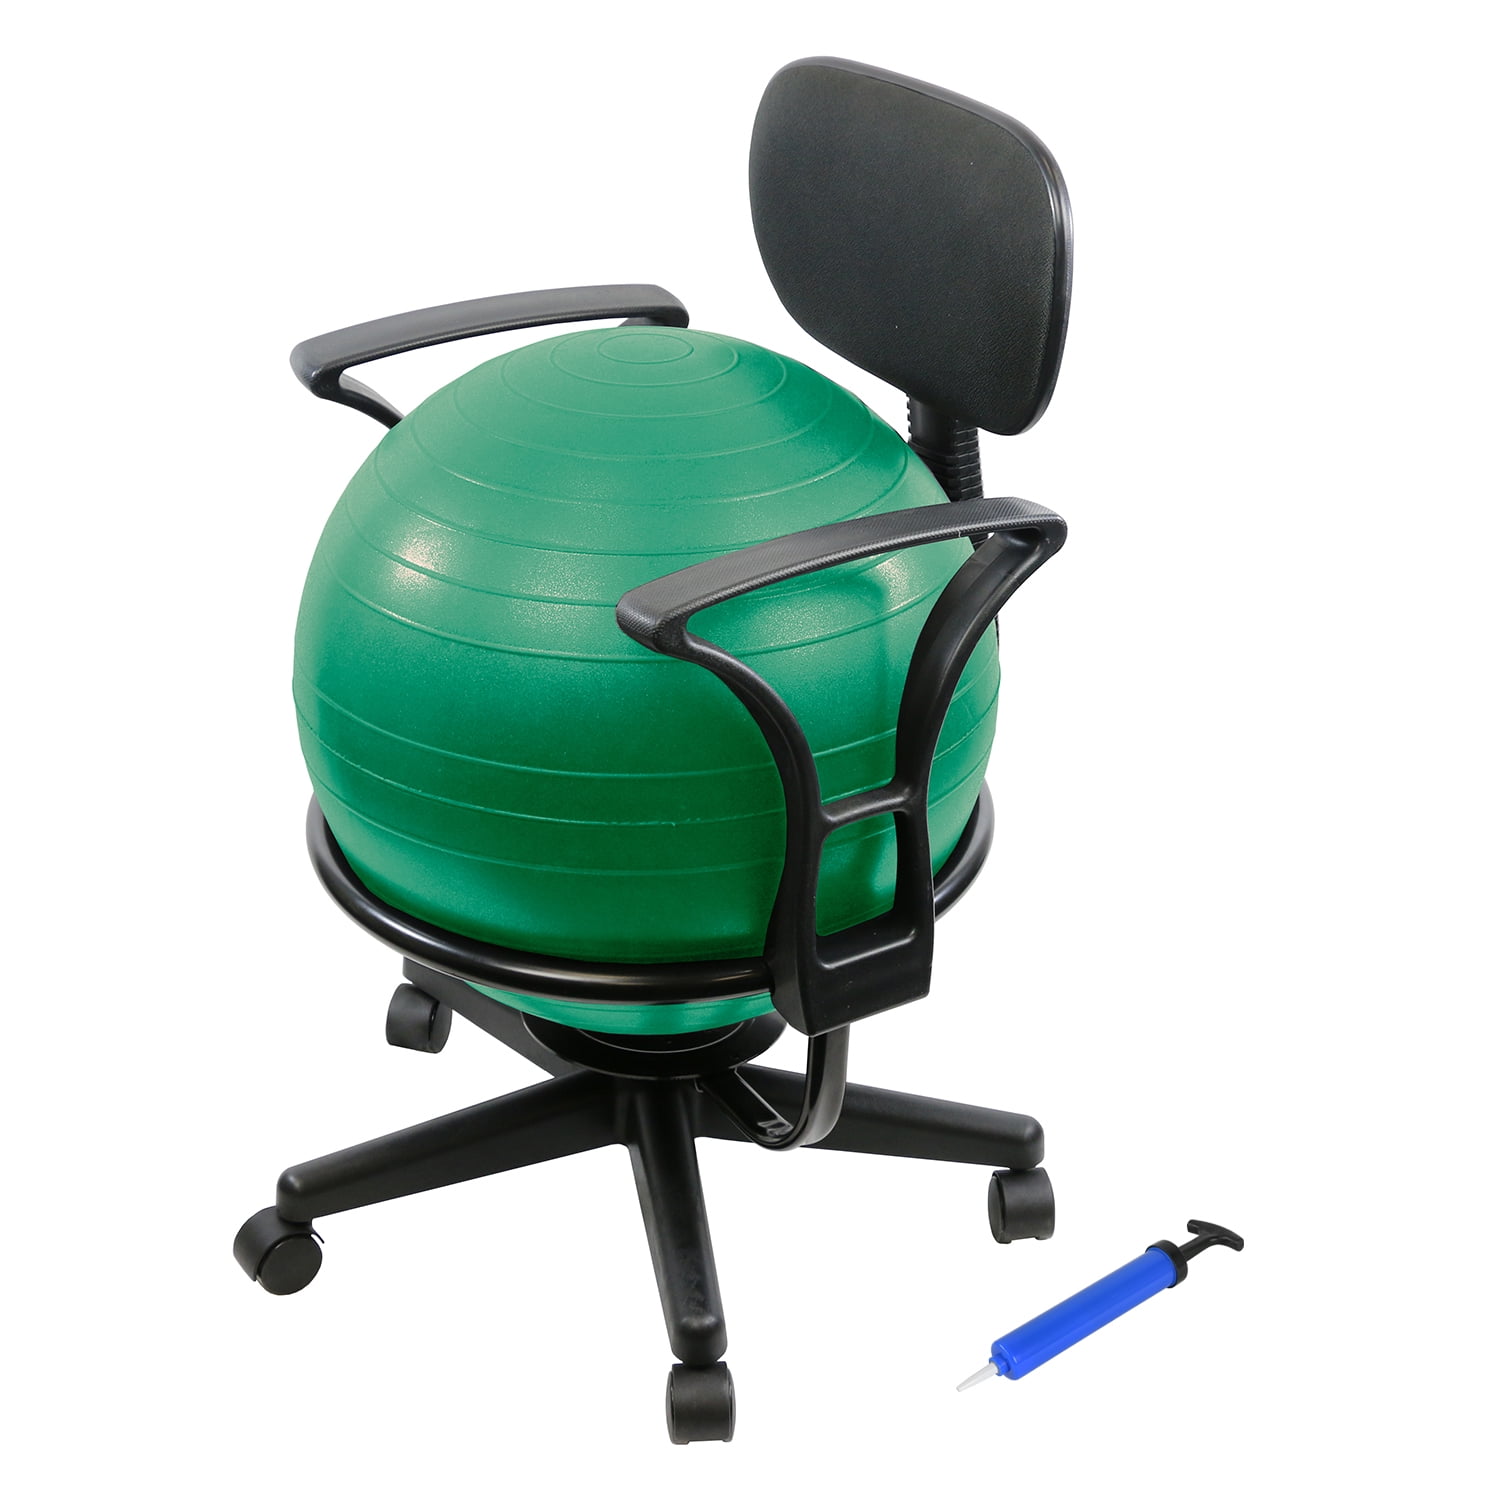 CanDo Metal Ball Chair Inflatable Ergonomic Active Seating Exercise